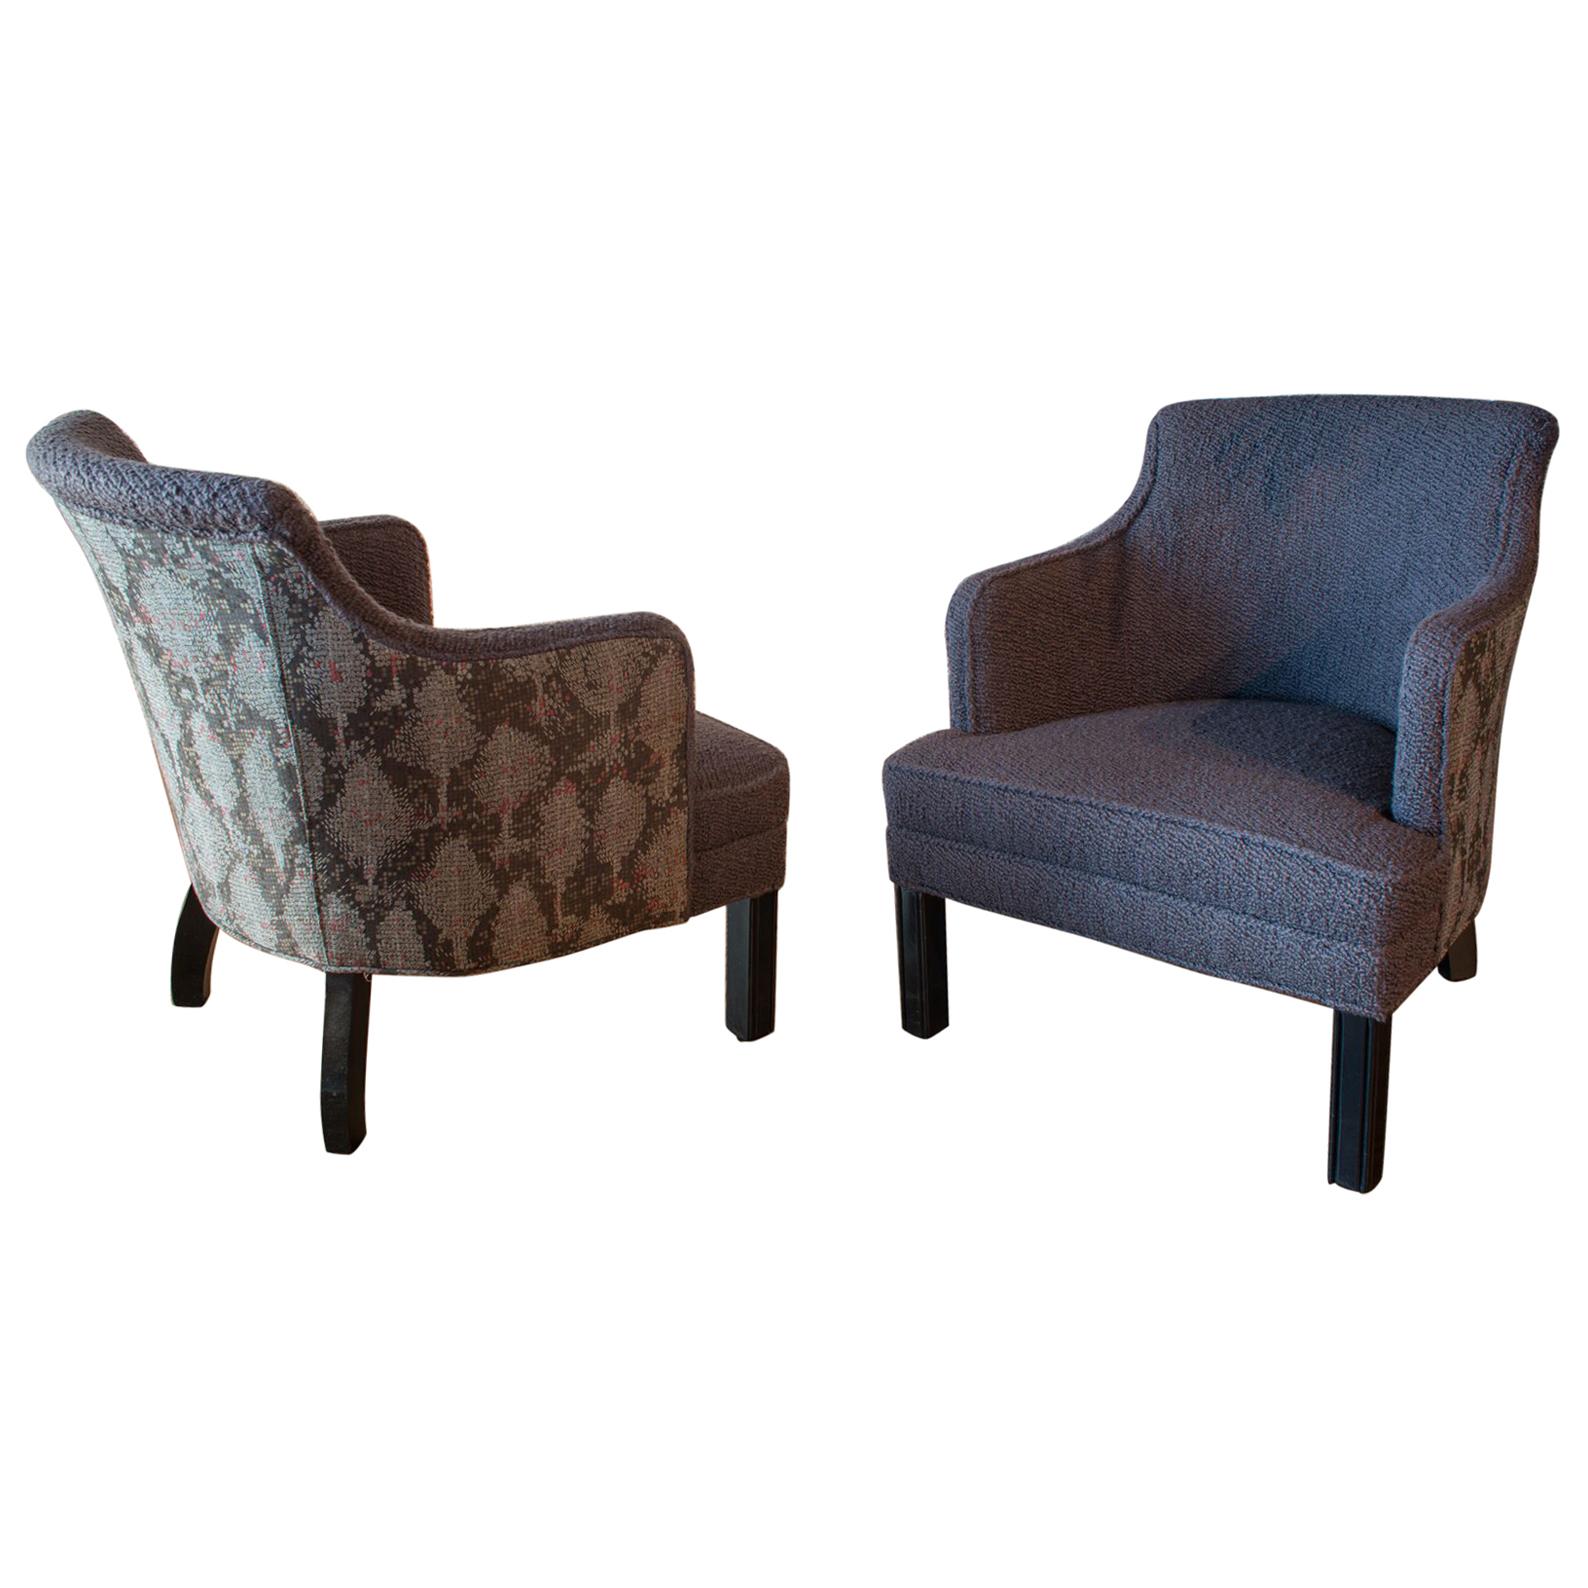 Classic Baker Style Club Chairs, Pair